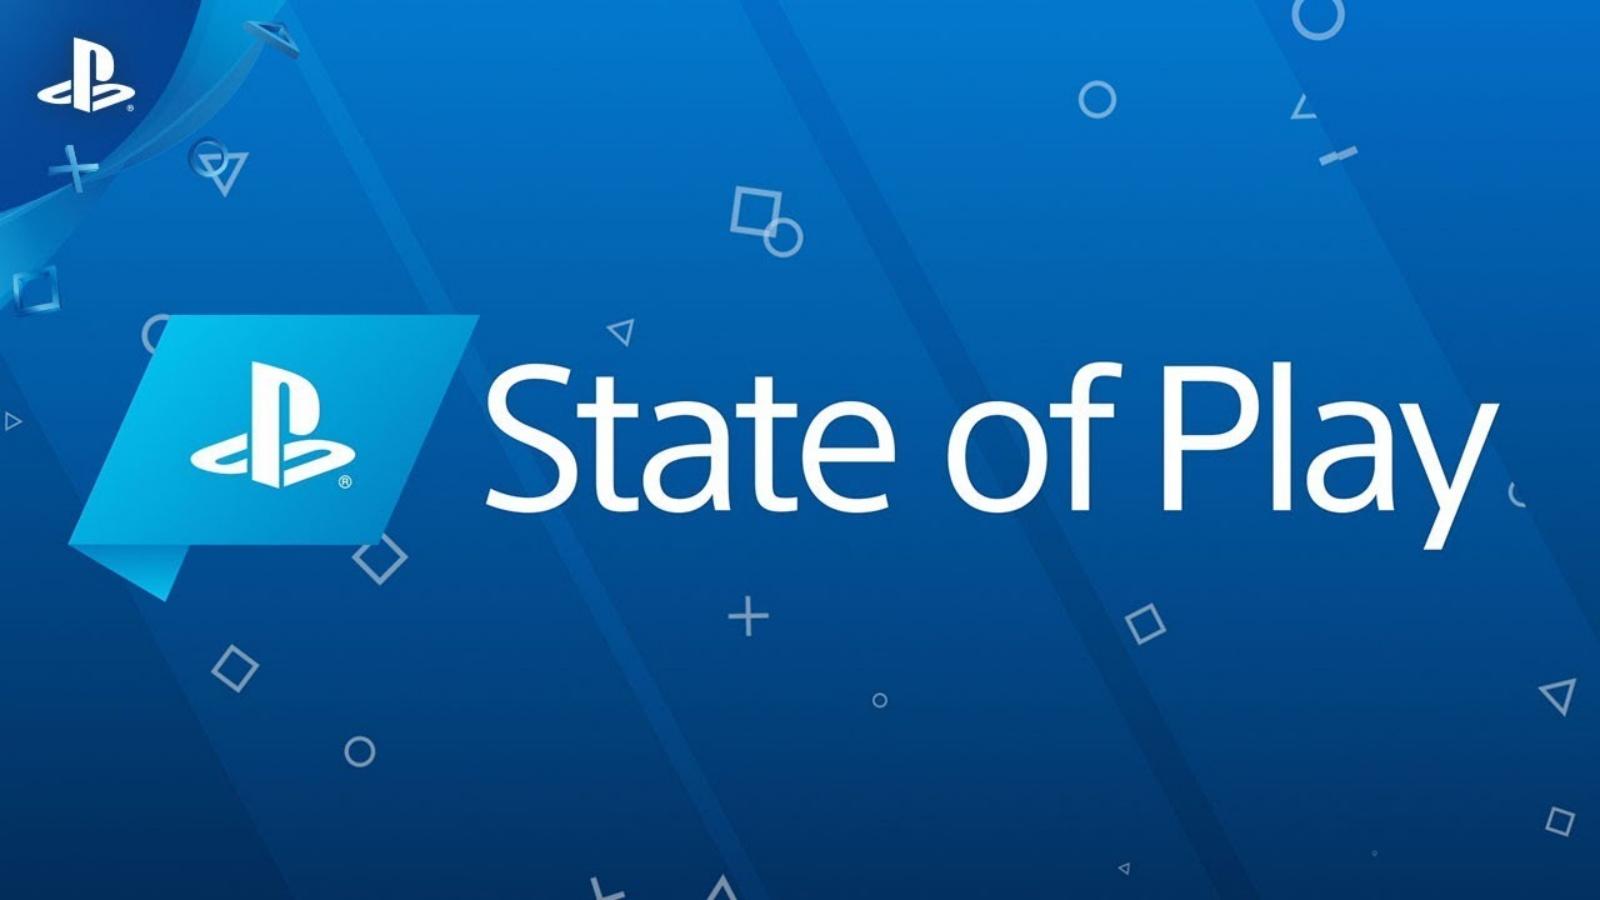 All The Games Revealed At Sony's State of Play